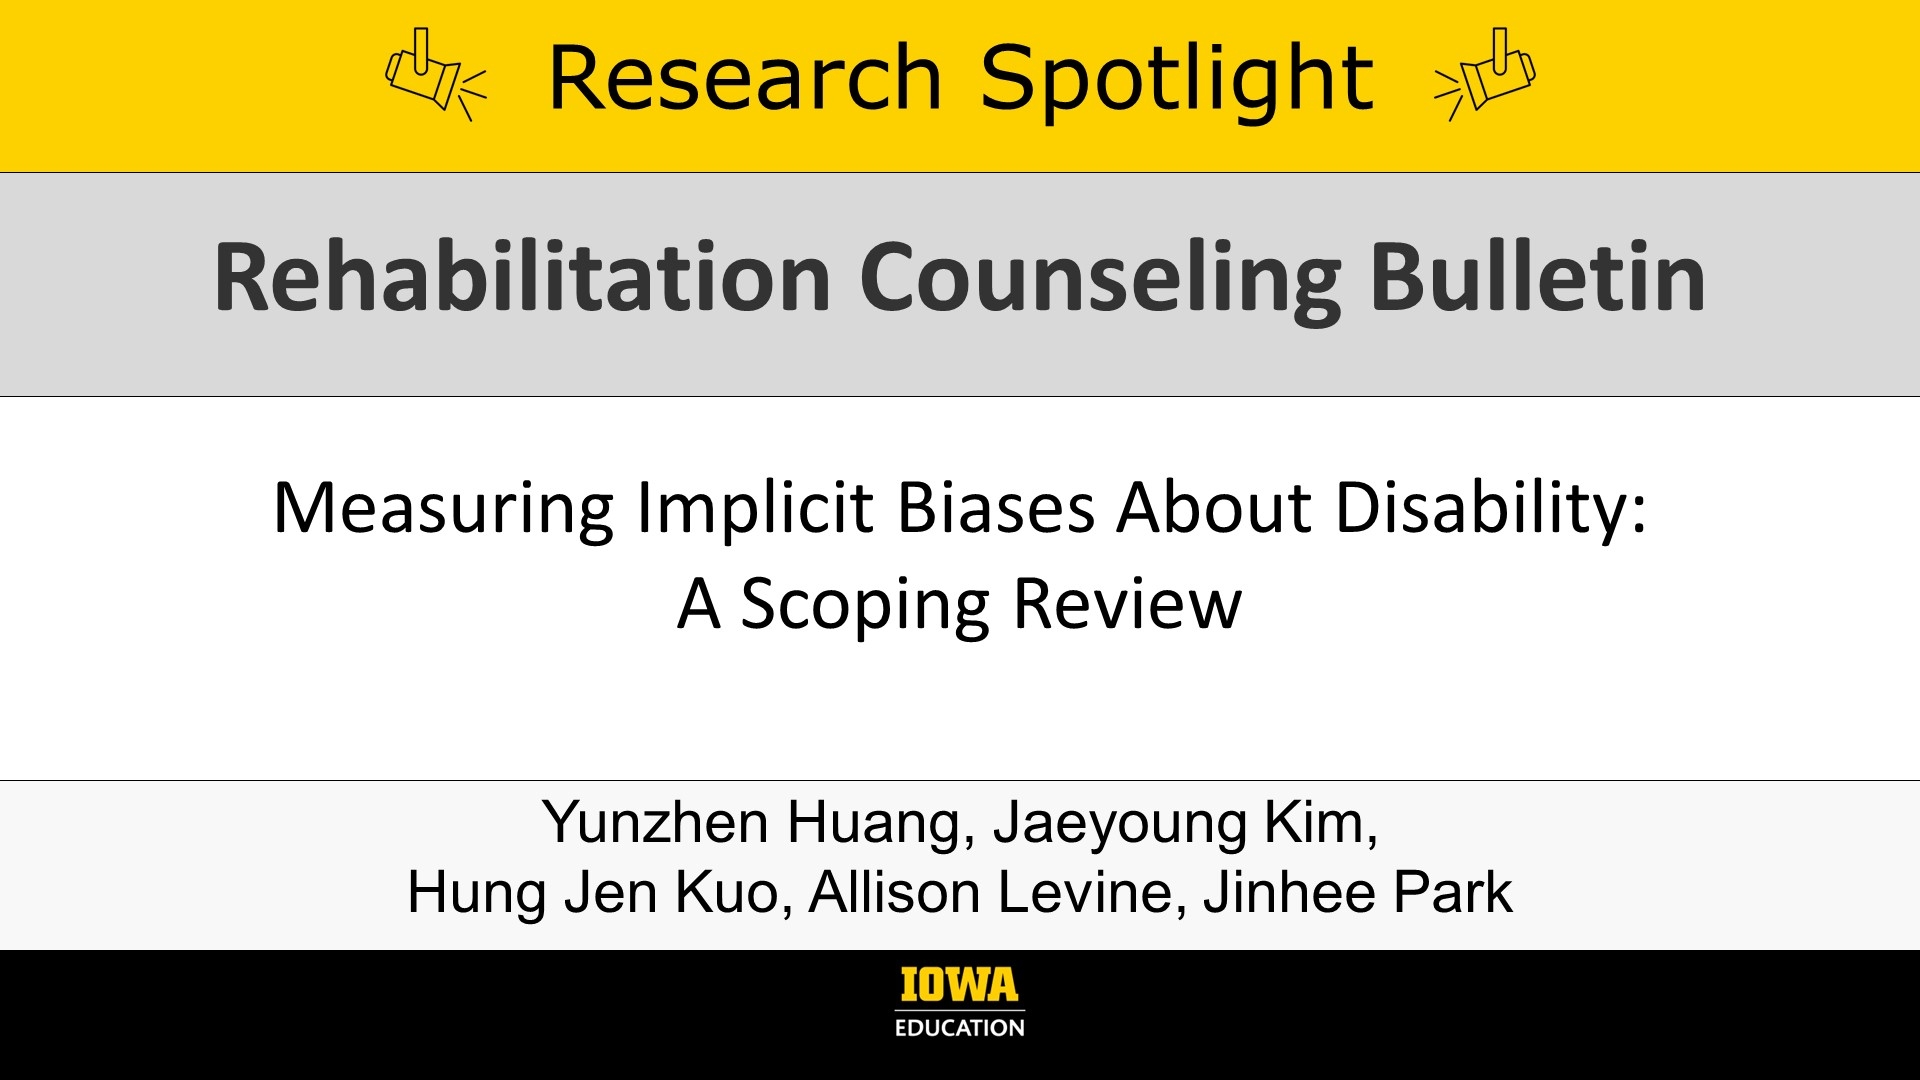 Research Spotlight: Measuring Implicit Biases About Disability: A Scoping Review. In Rehabilitation Counseling Bulletin